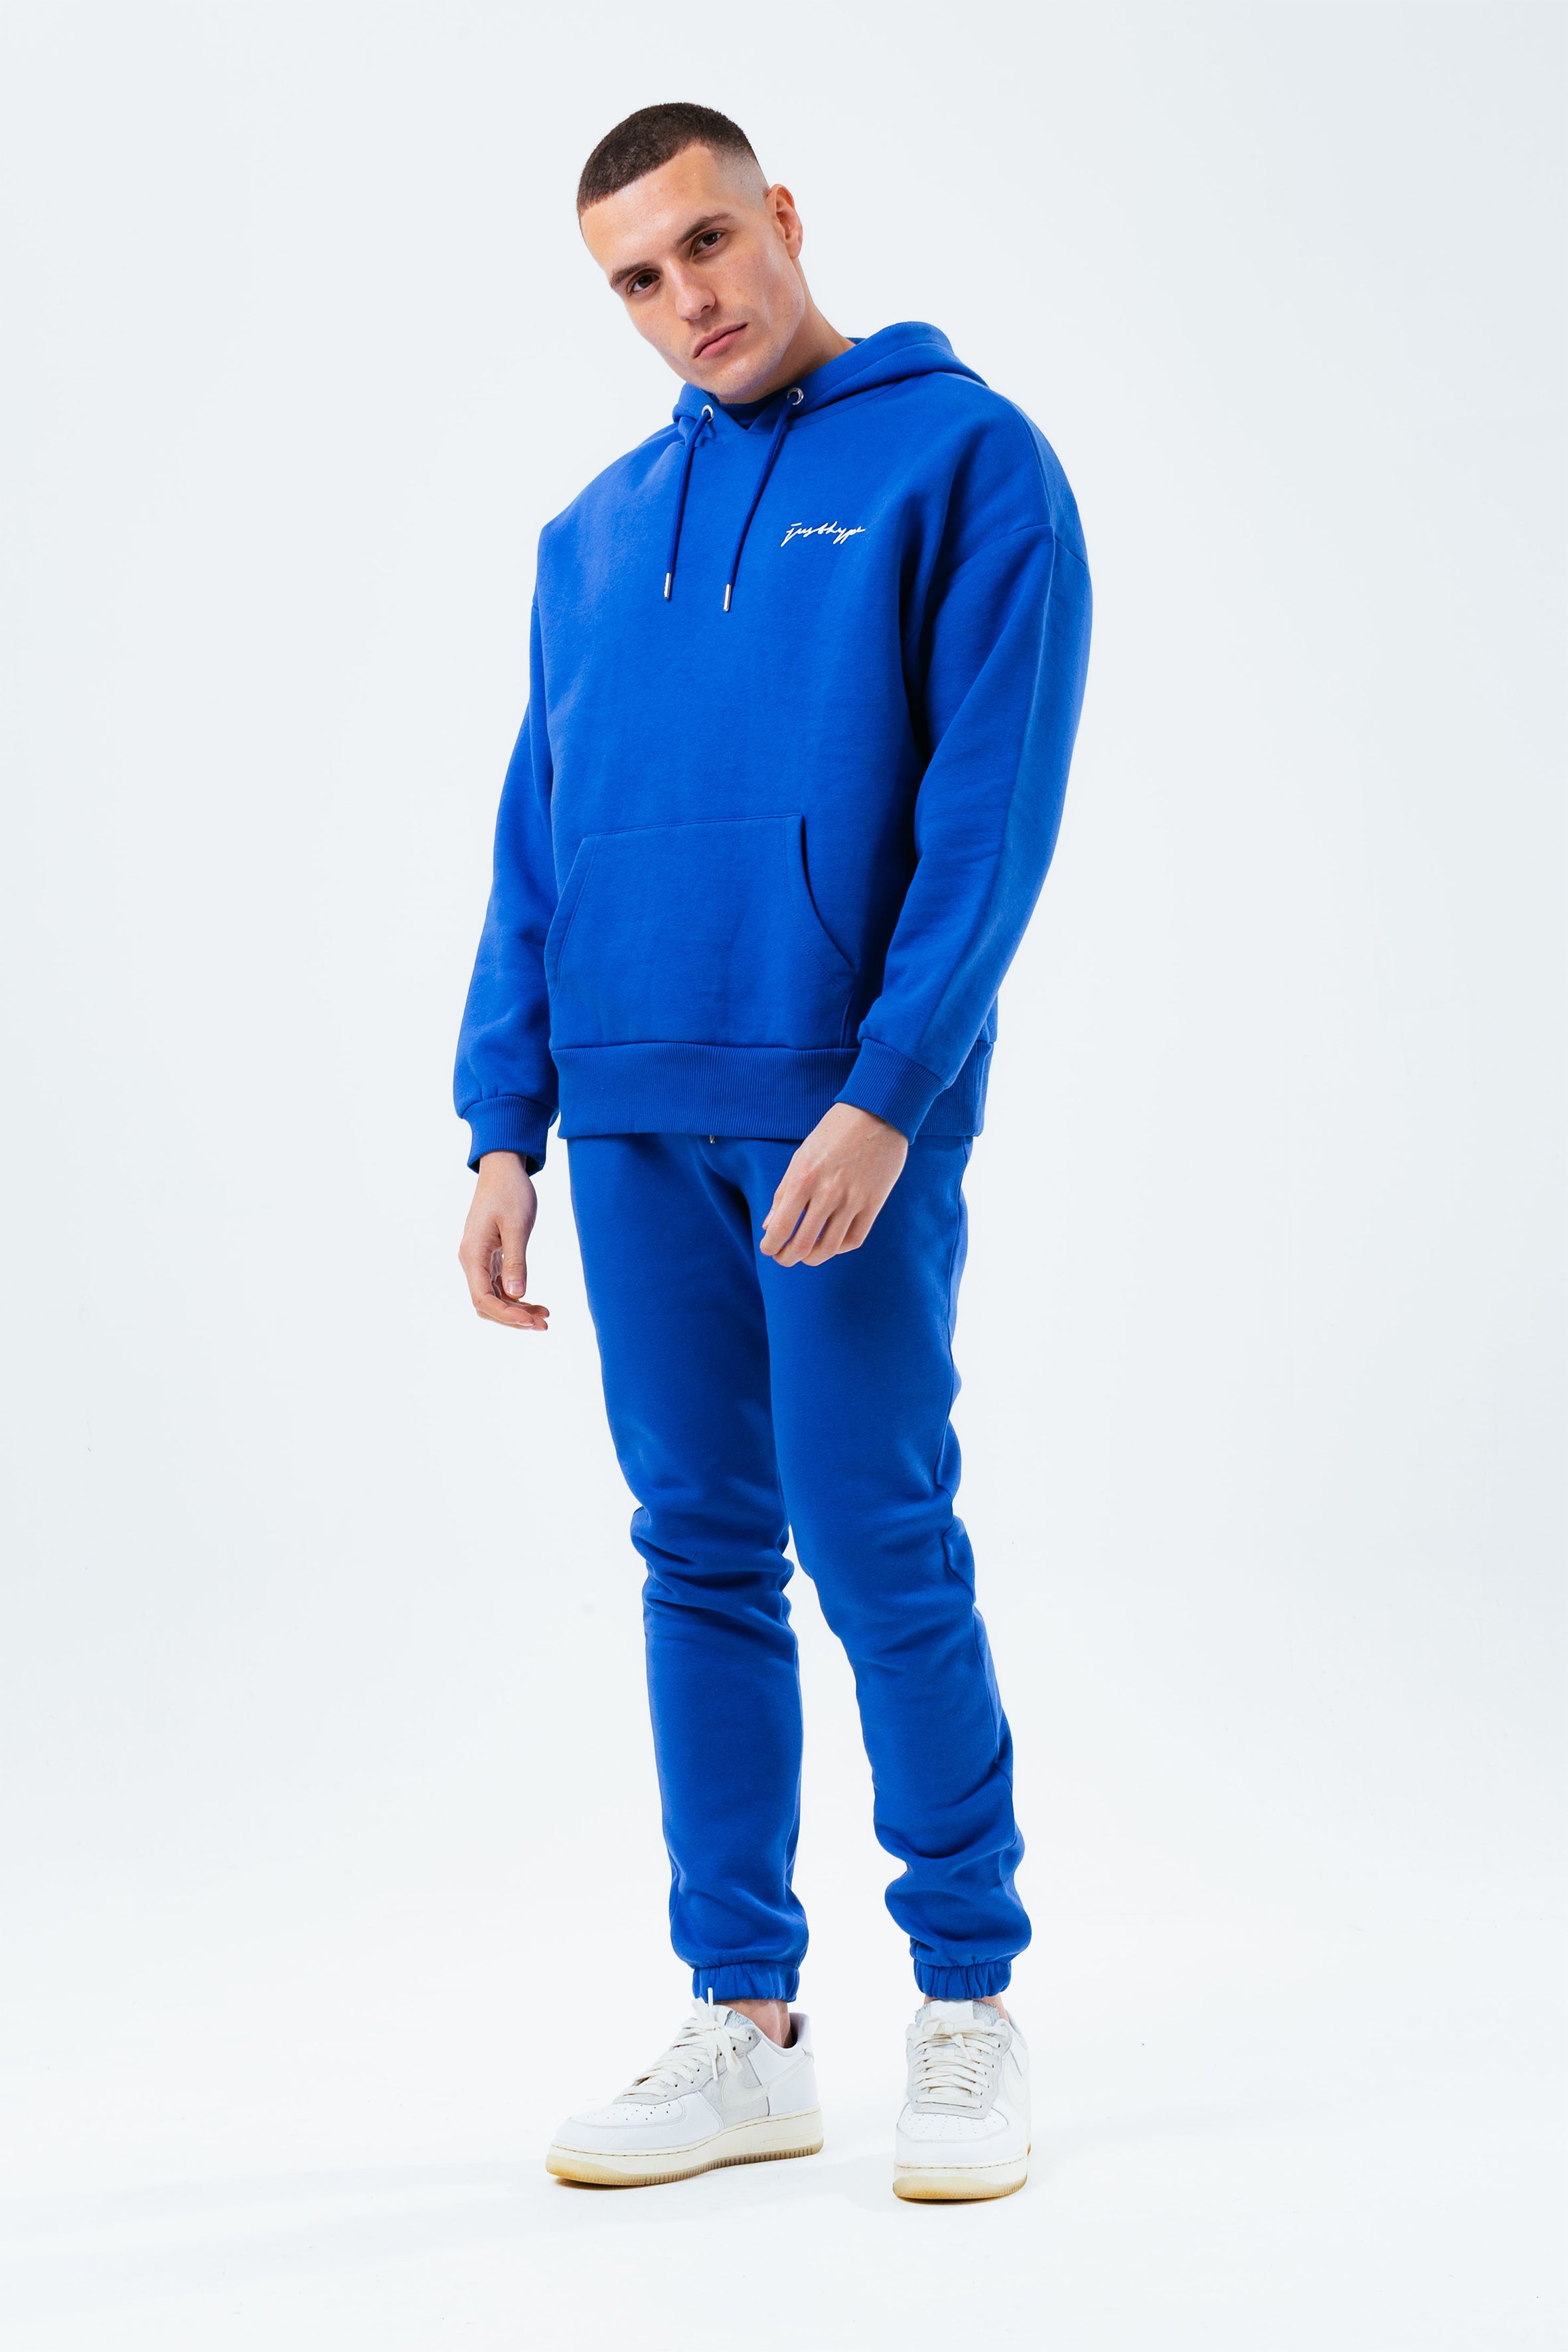 HYPE ROYAL BLUE MEN'S OVERSIZED PULLOVER HOODIE | Hype.